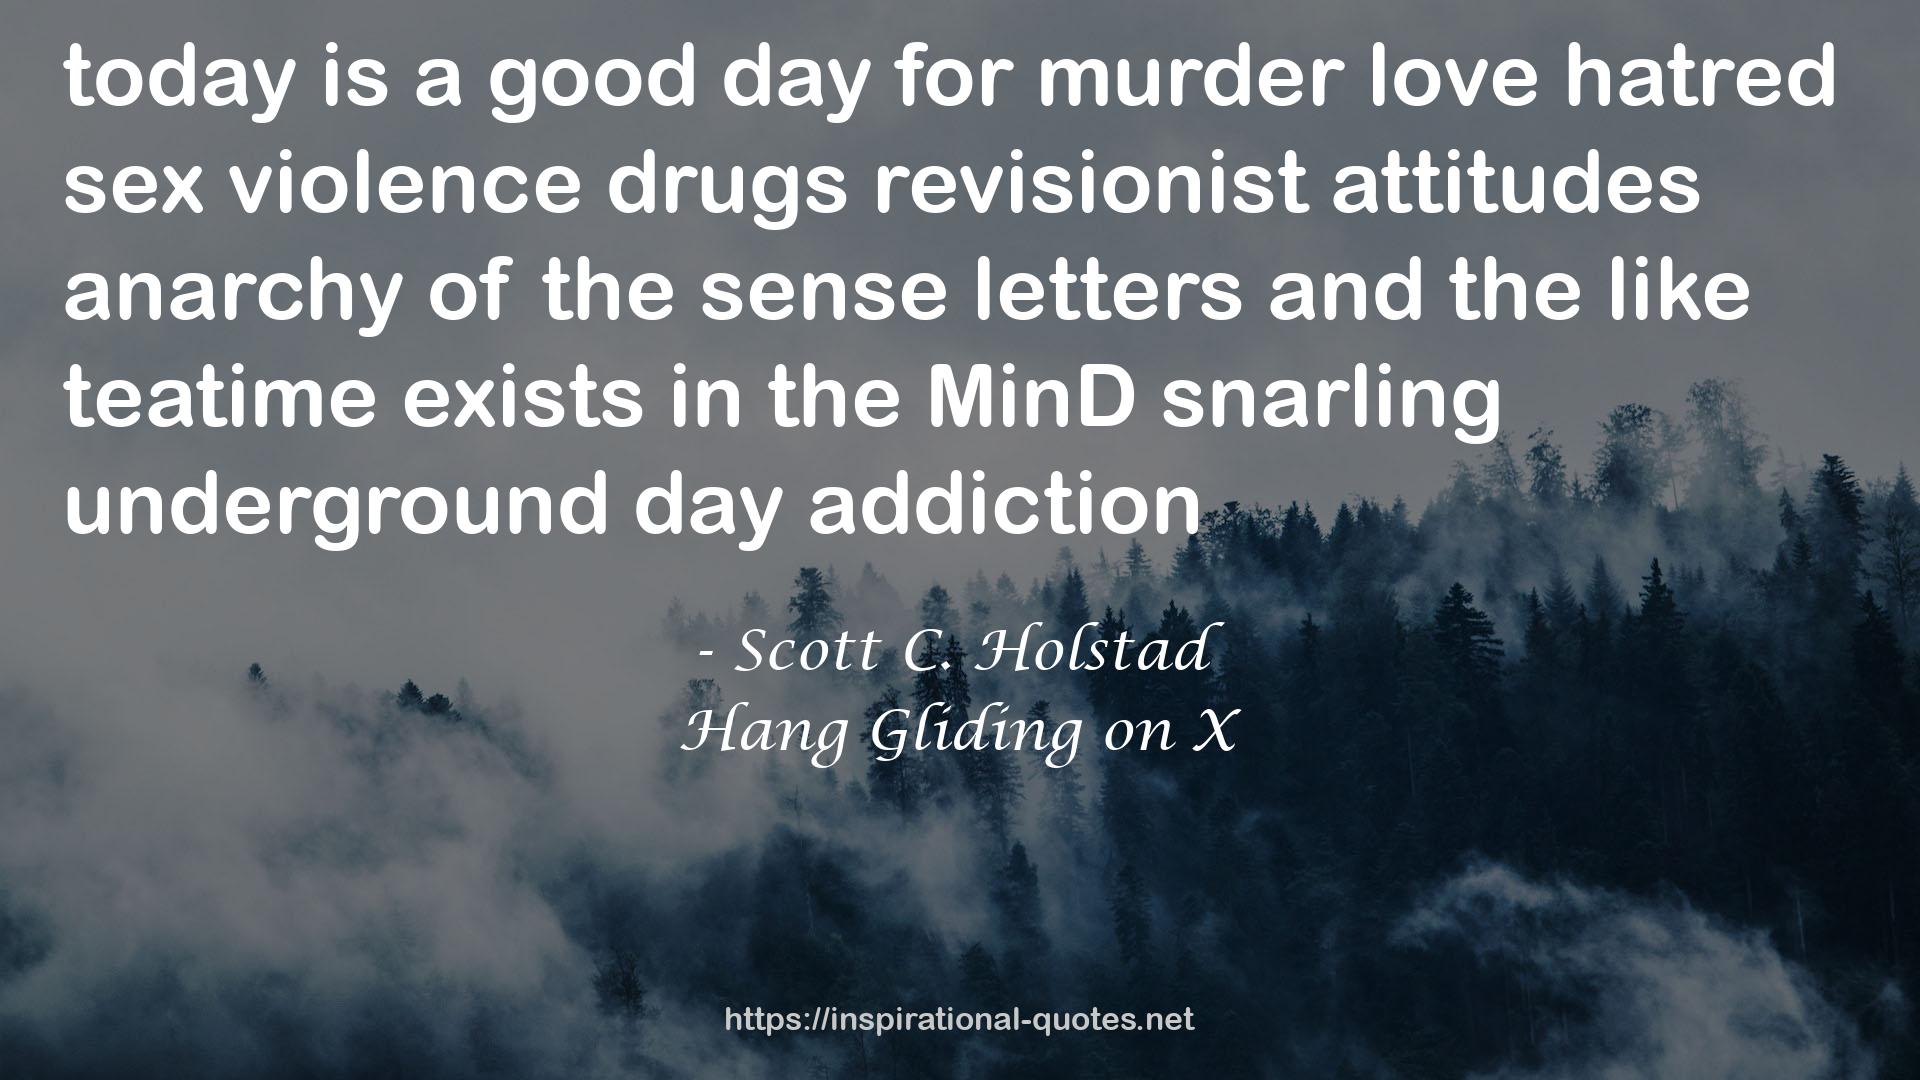 Scott C. Holstad quote : today is a good day for murder love hatred sex violence drugs revisionist attitudes anarchy of the sense letters and the like teatime exists in the MinD snarling underground day addiction